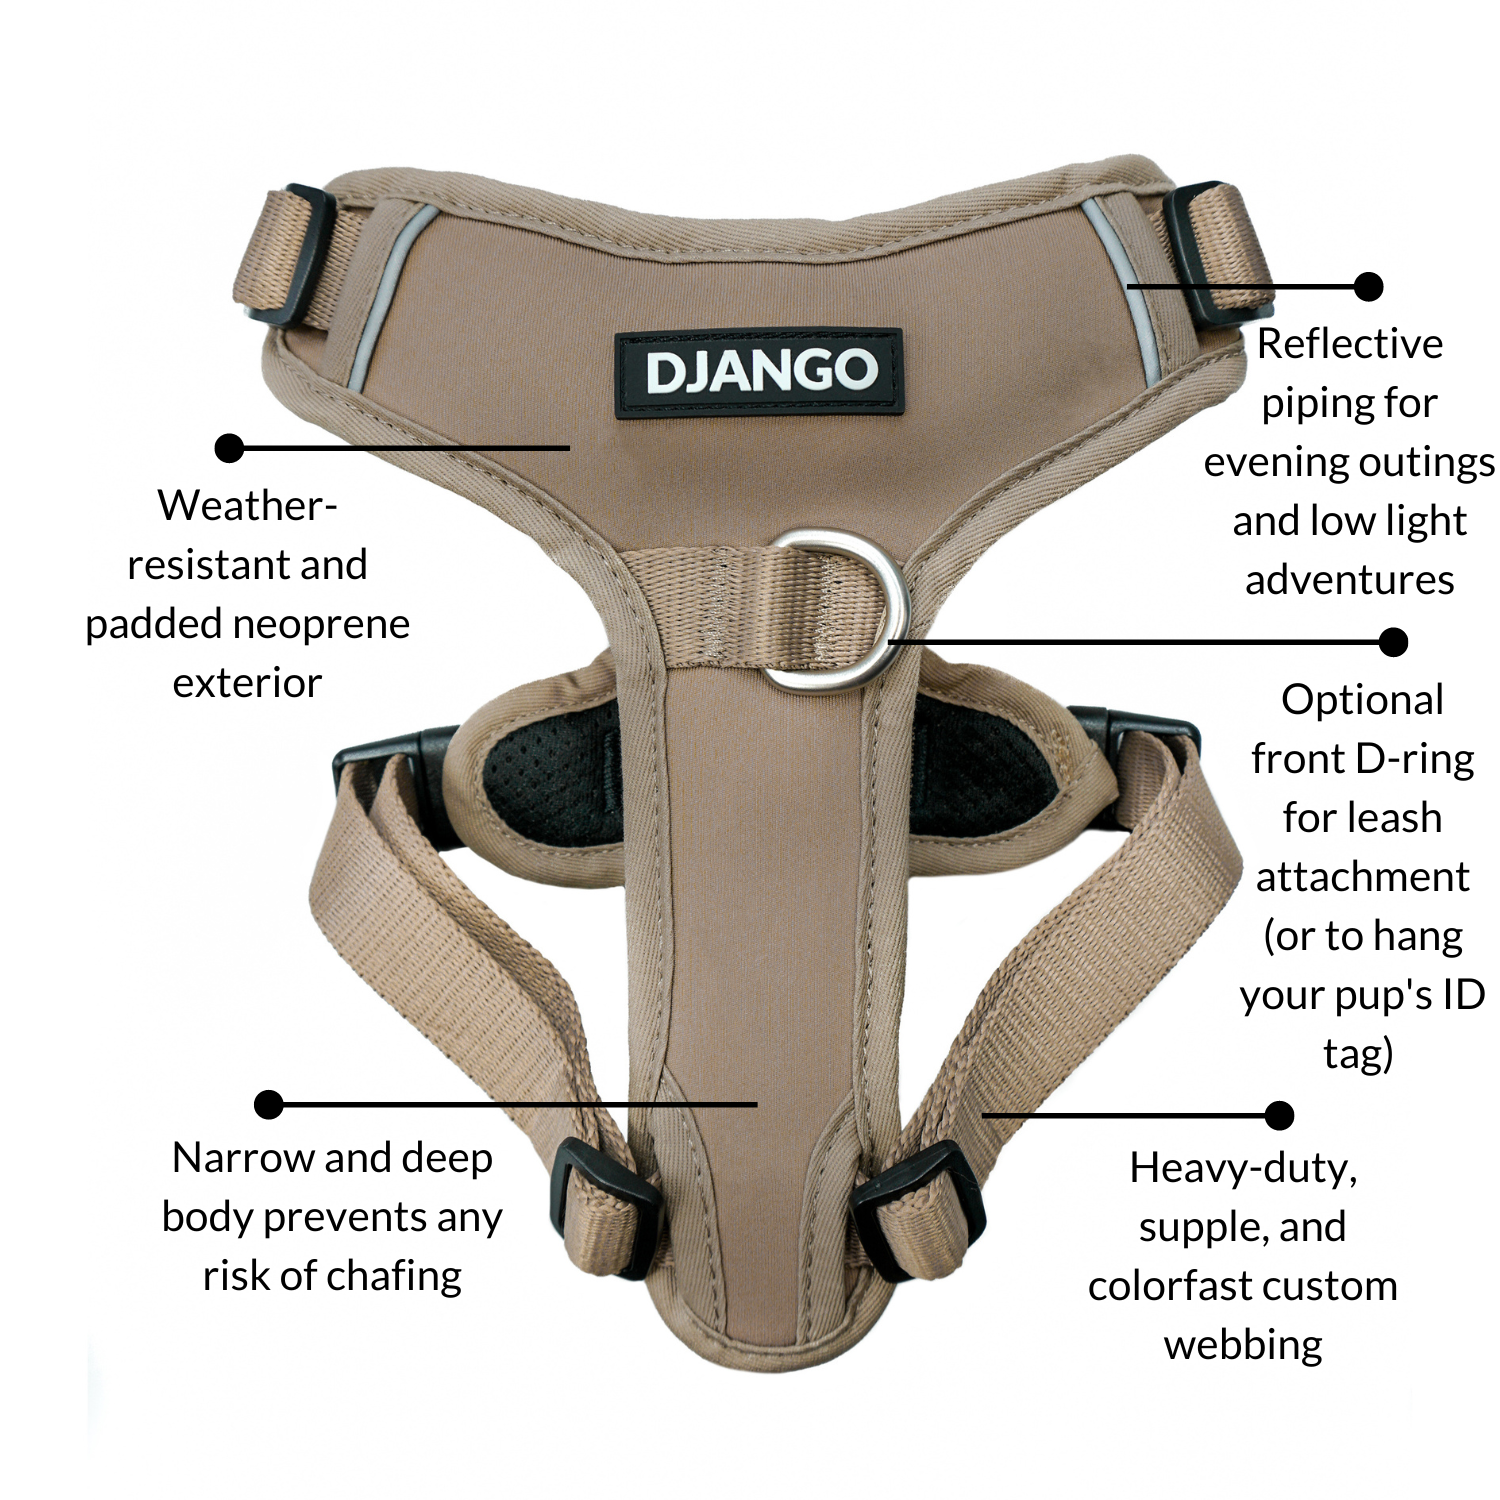 DJANGO Tahoe No Pull Dog Harness in Sandy Beige - Key features include a weather-resistant and padded neoprene exterior, a narrow and deep harness body (to prevent the risk of chafing) reflective piping, and soft webbing. - djangobrand.com